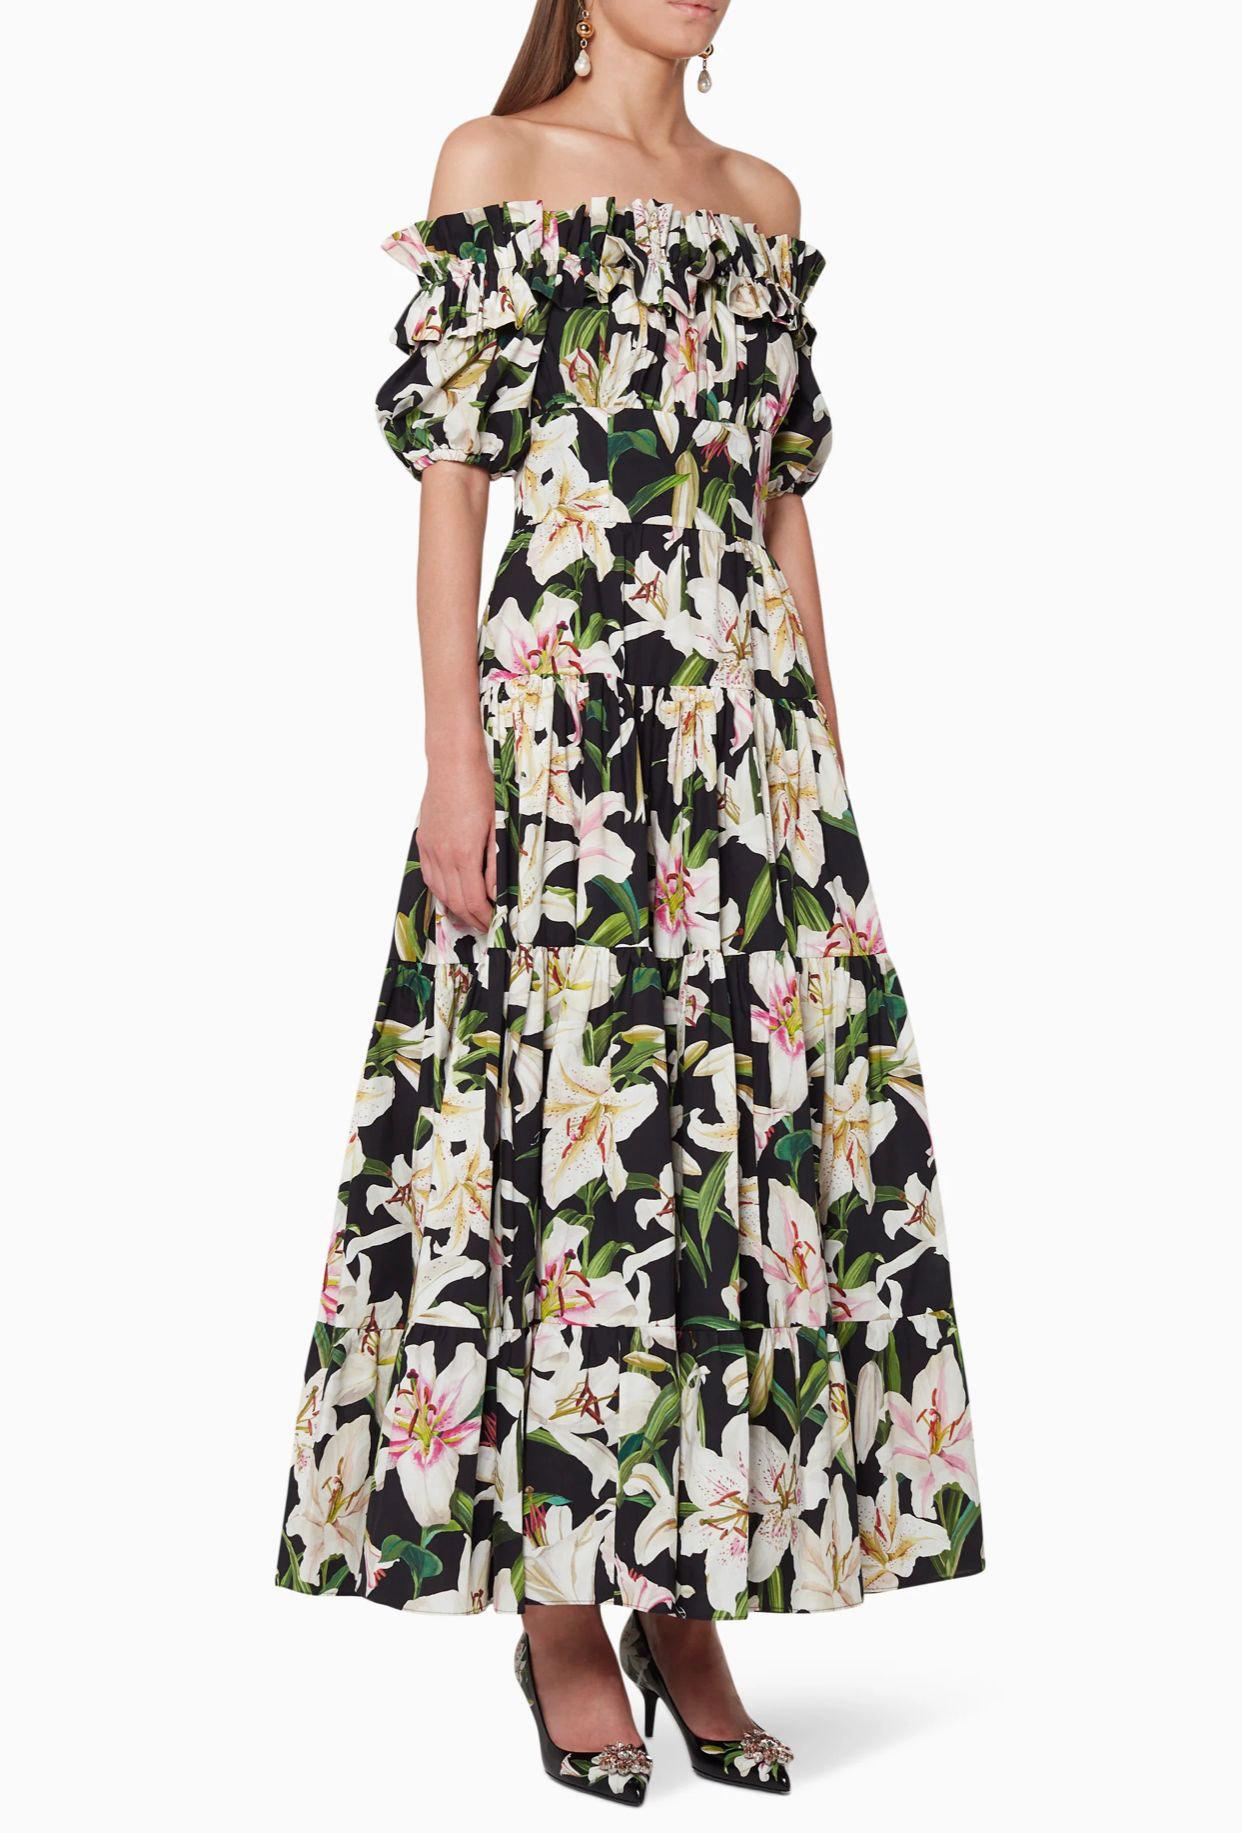 Gorgeous brand new with tags, 100% Authentic Dolce & Gabbana long cotton poplin dress with floral print features a straight neckline with ruches and elastic, short elasticated sleeves, partially lined, rear zipper and hook-and-eye fastening.

Model: